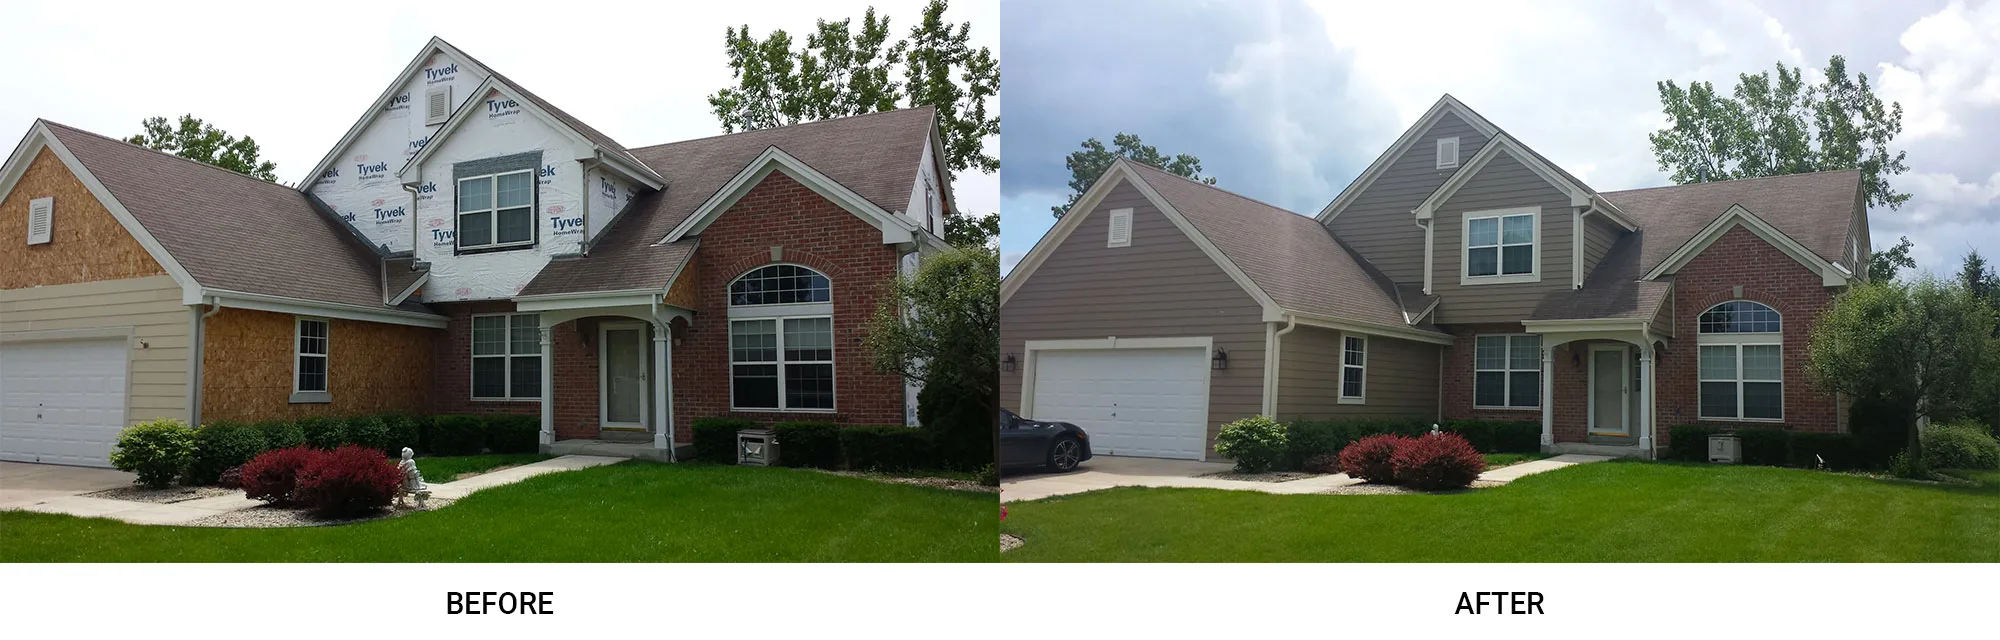 Before and After of new siding from Dick's Roof Repair Service on two story home